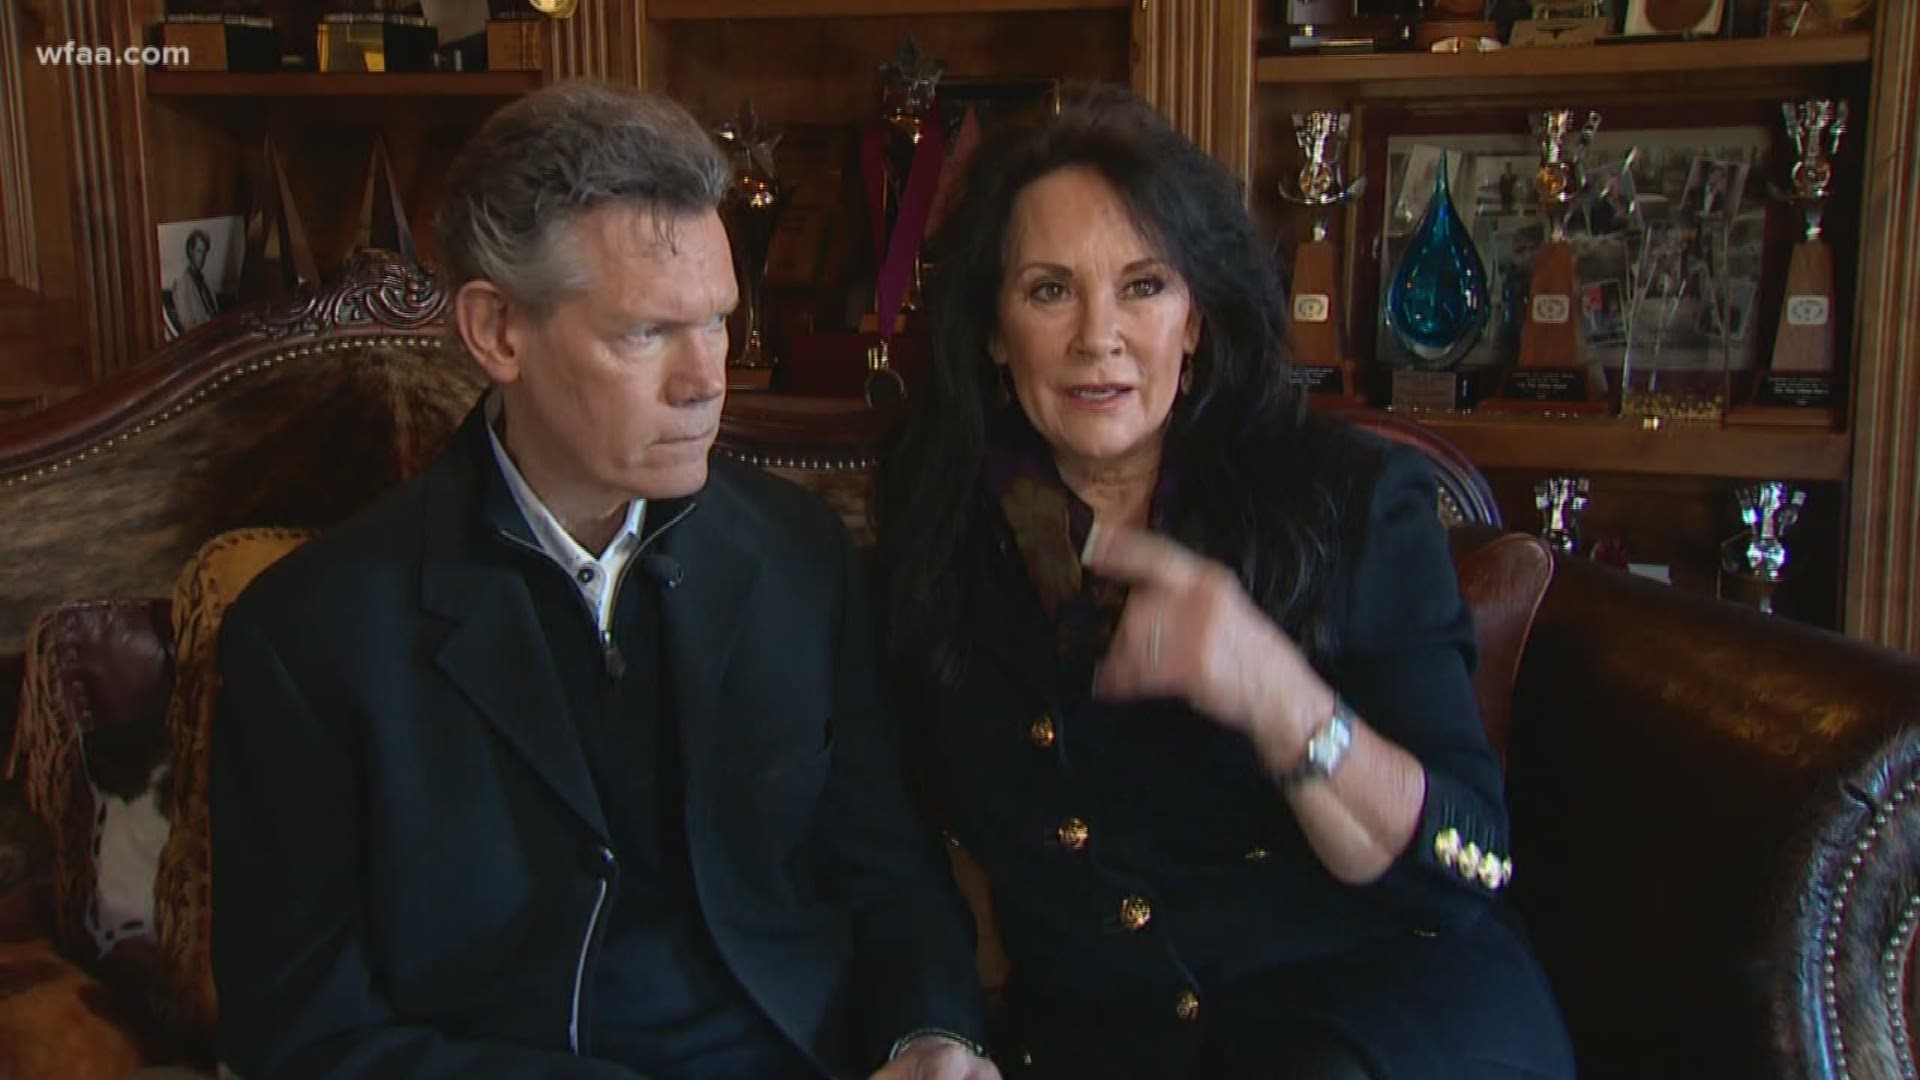 North Texan and country music star Randy Travis remembers friend George H.W. Bush